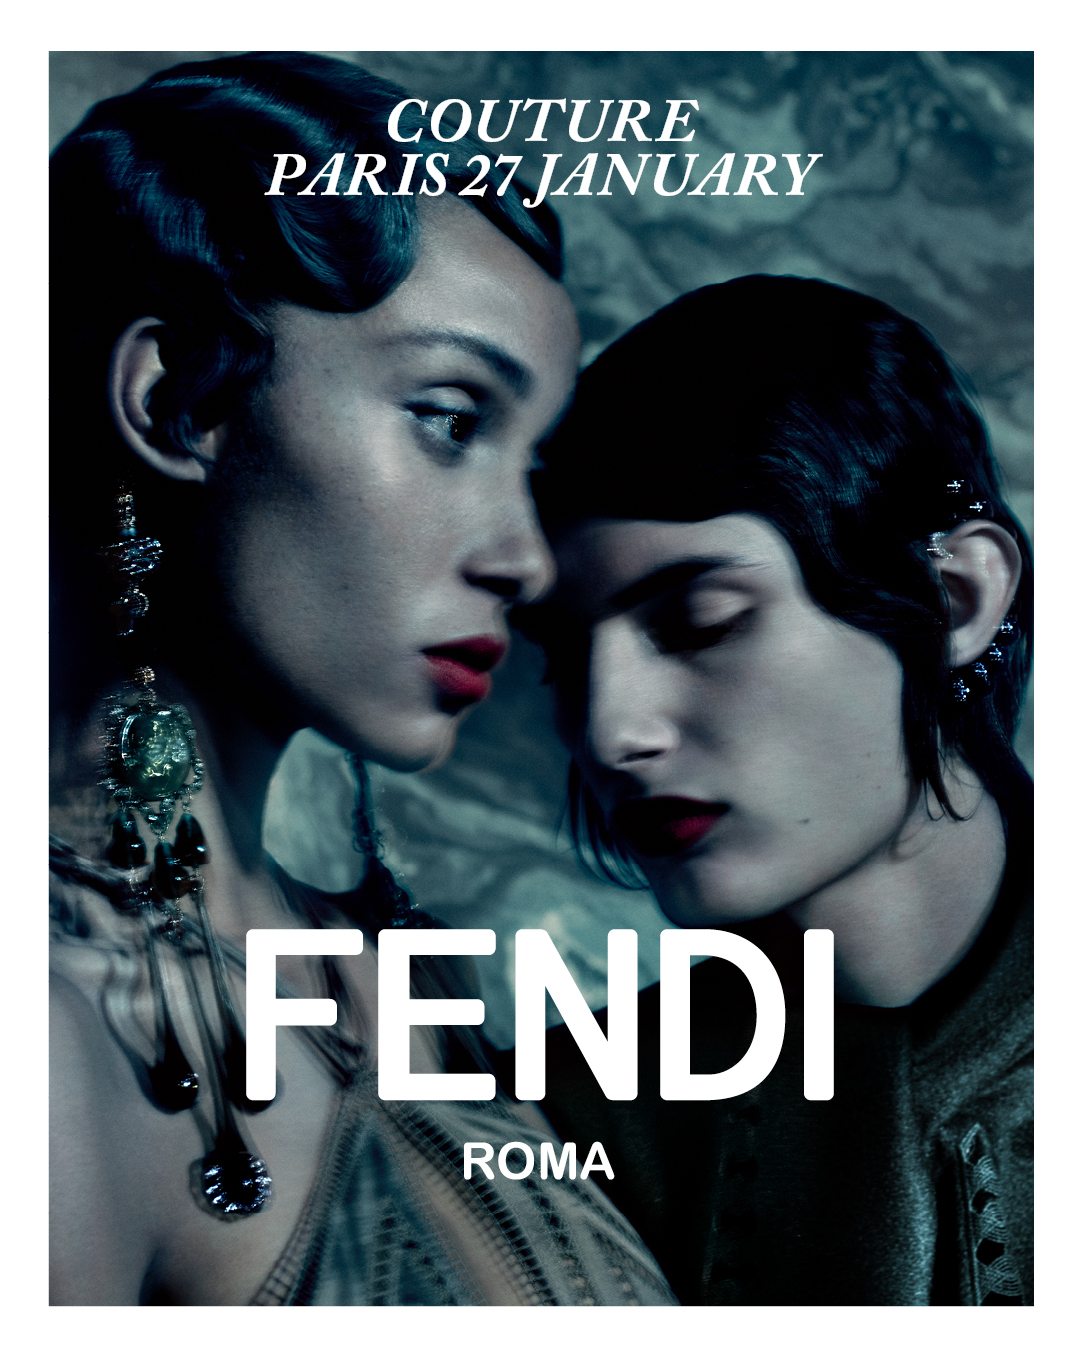 FENDI SS21 Couture by KIM JONES_photo by Paolo Roversi PORTRAIT